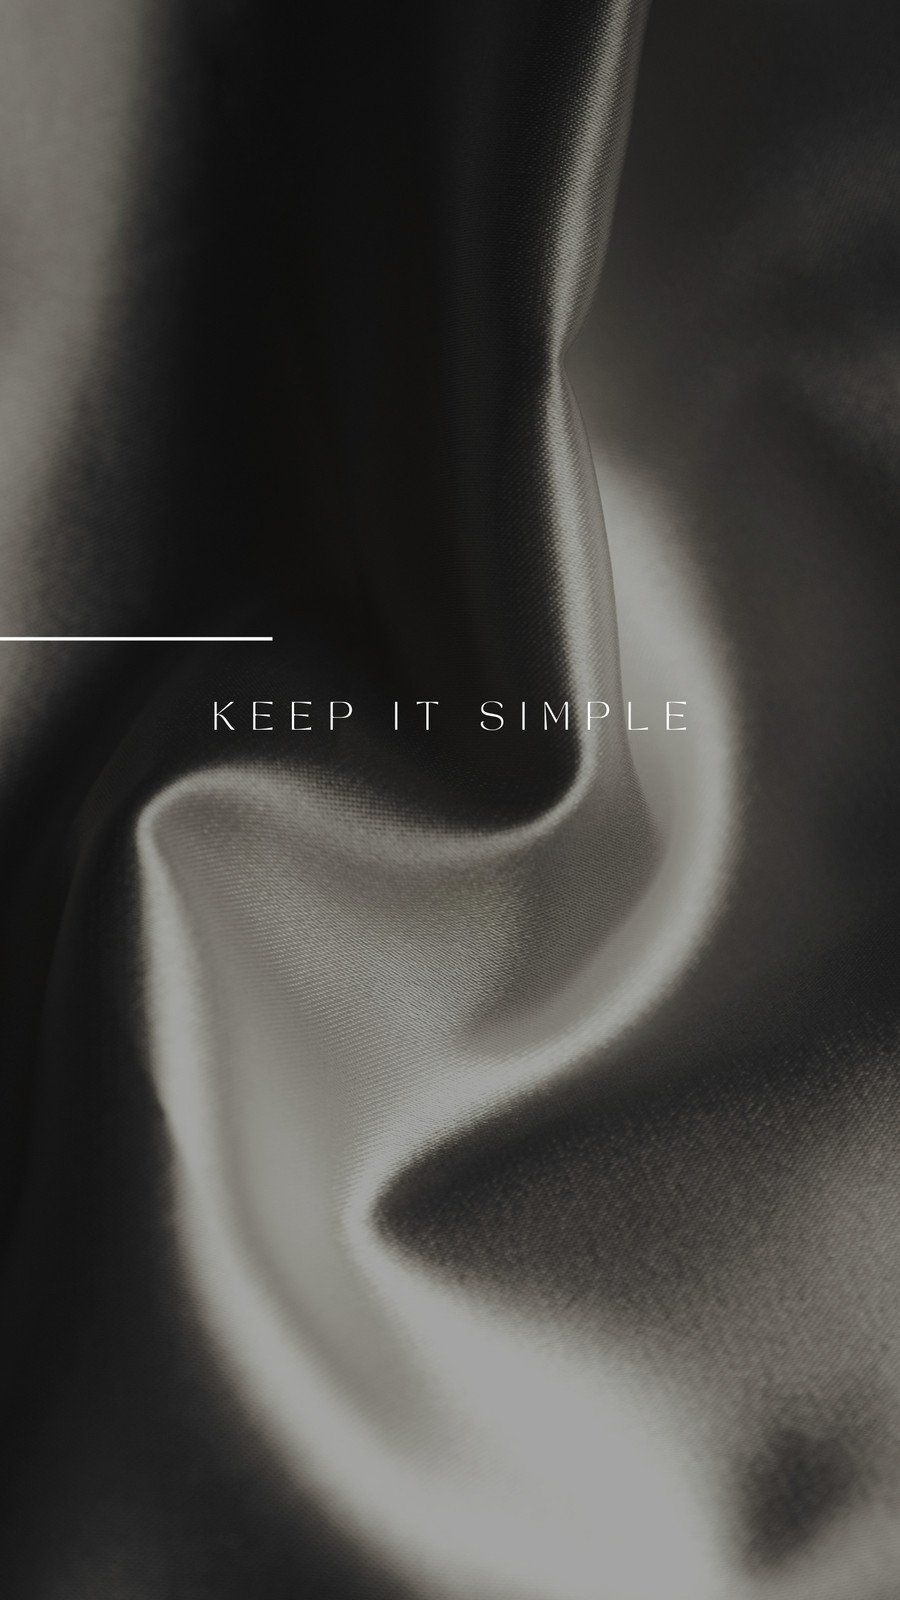 Keep it simple wallpaper - Silk, quotes